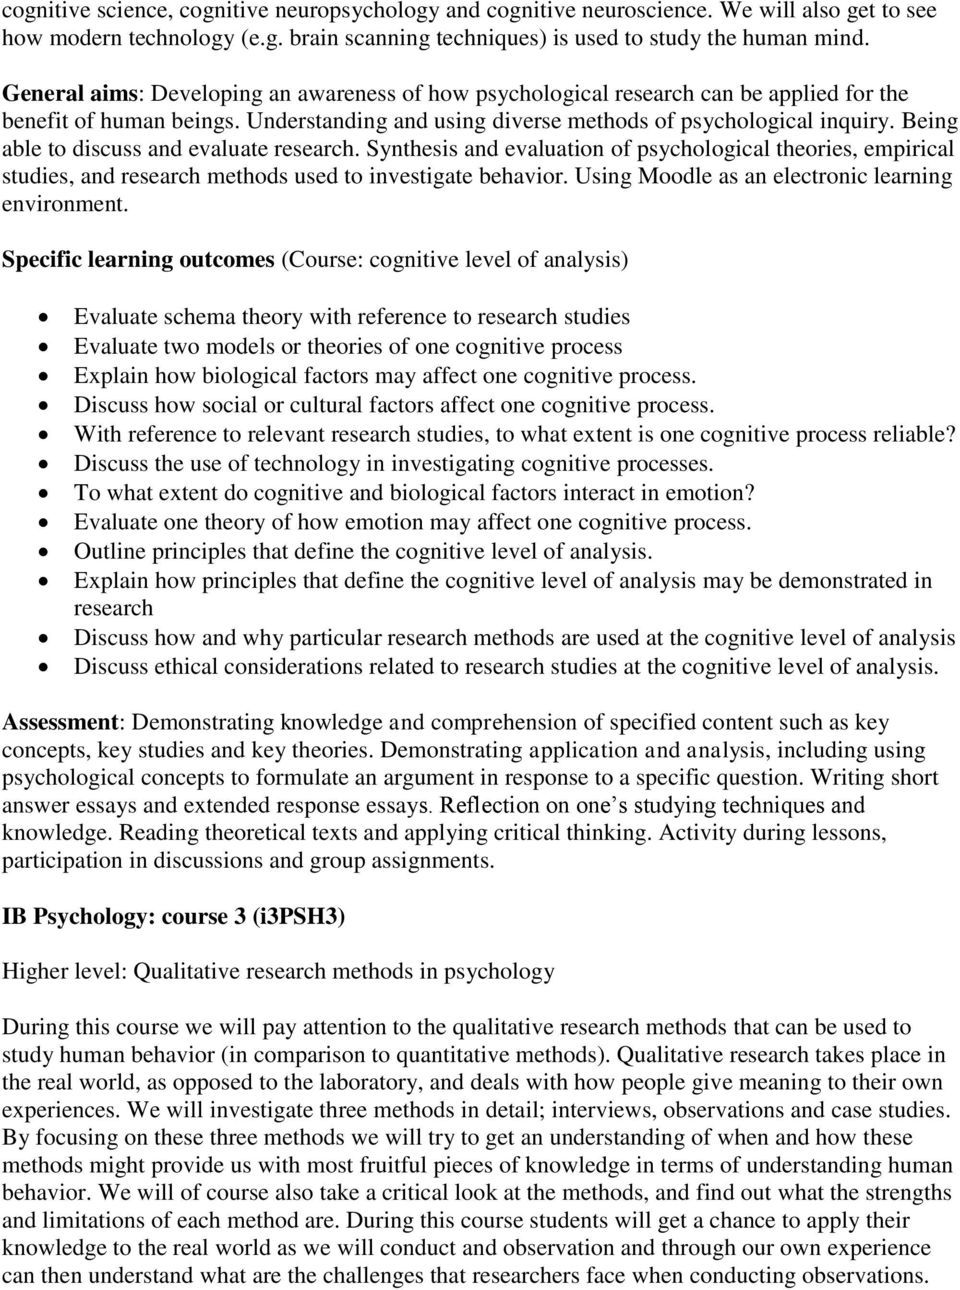 Specific learning outcomes (Course: cognitive level of analysis) Evaluate schema theory with reference to research studies Evaluate two models or theories of one cognitive process Explain how